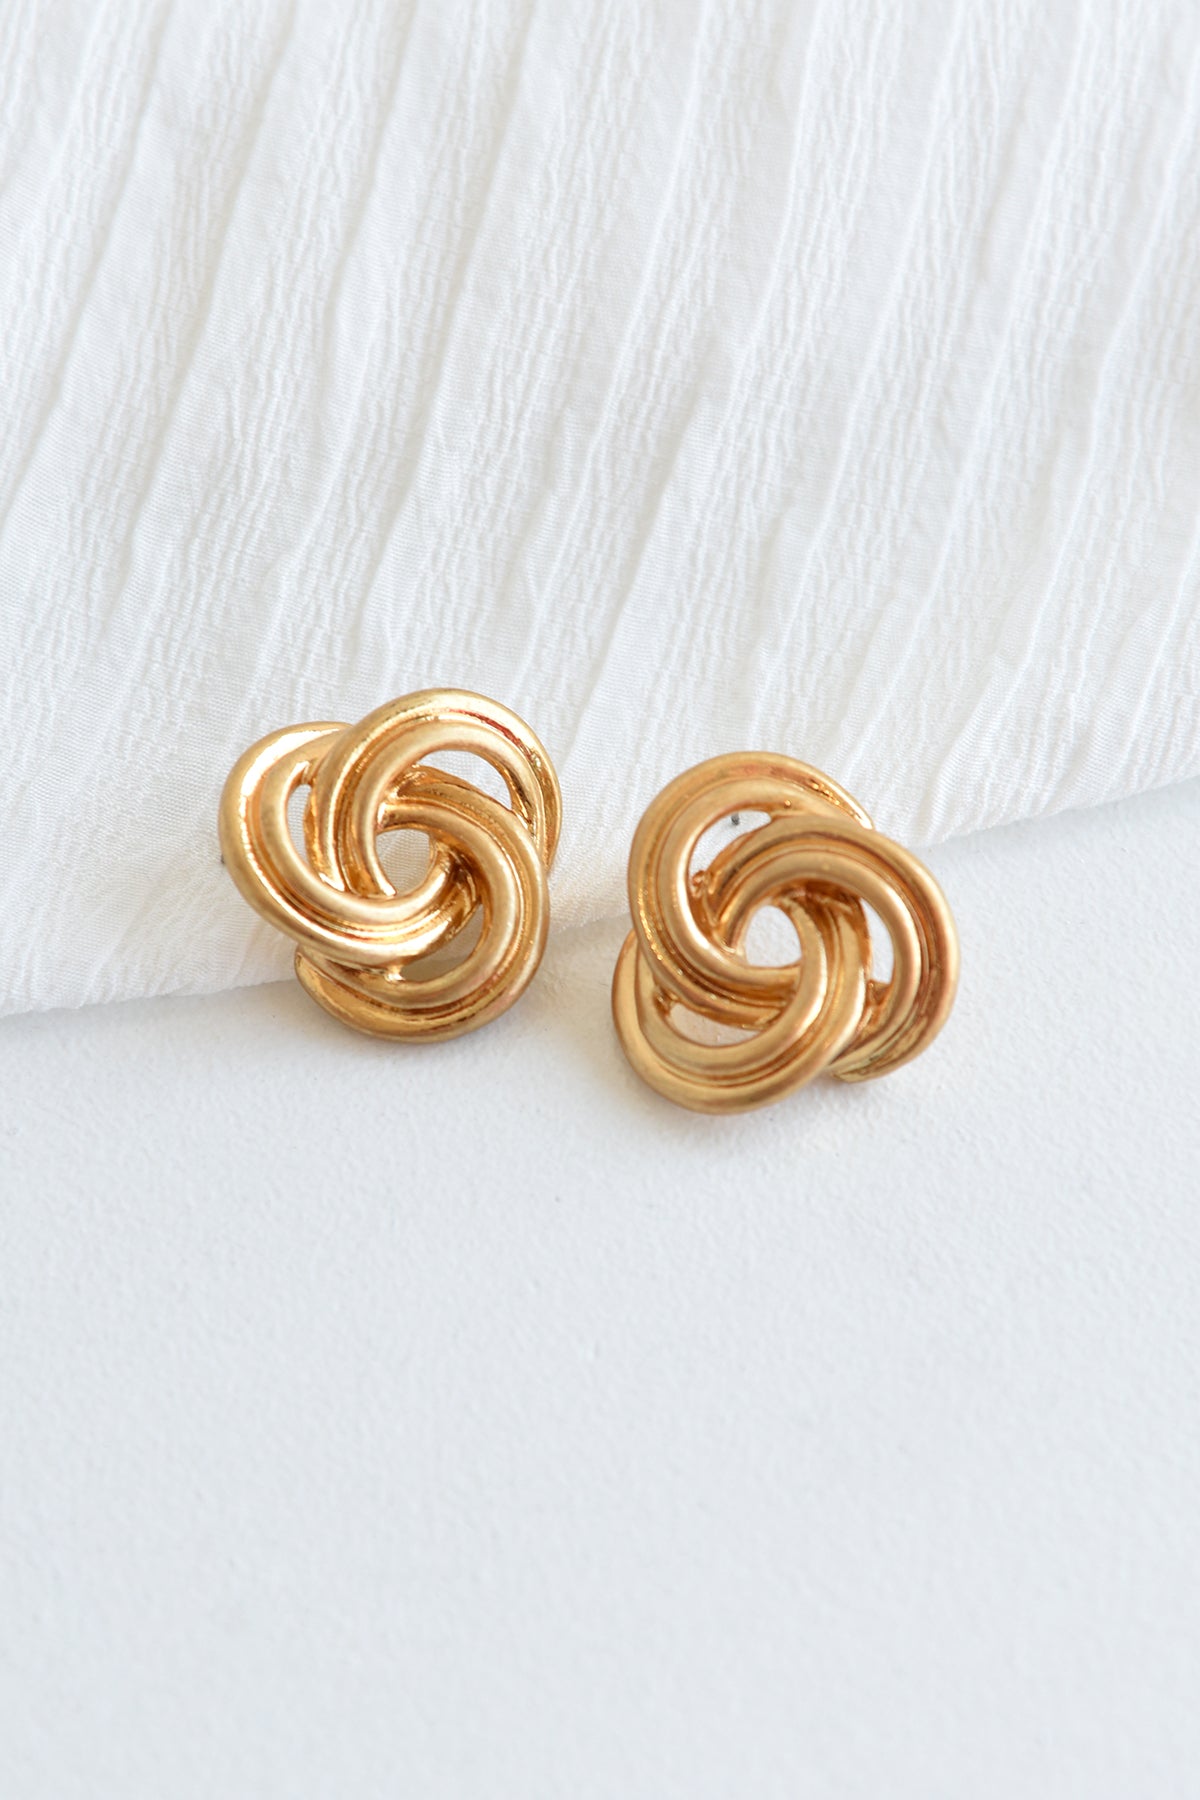 STATEMENT GOLD KNOT STUD EARRINGS